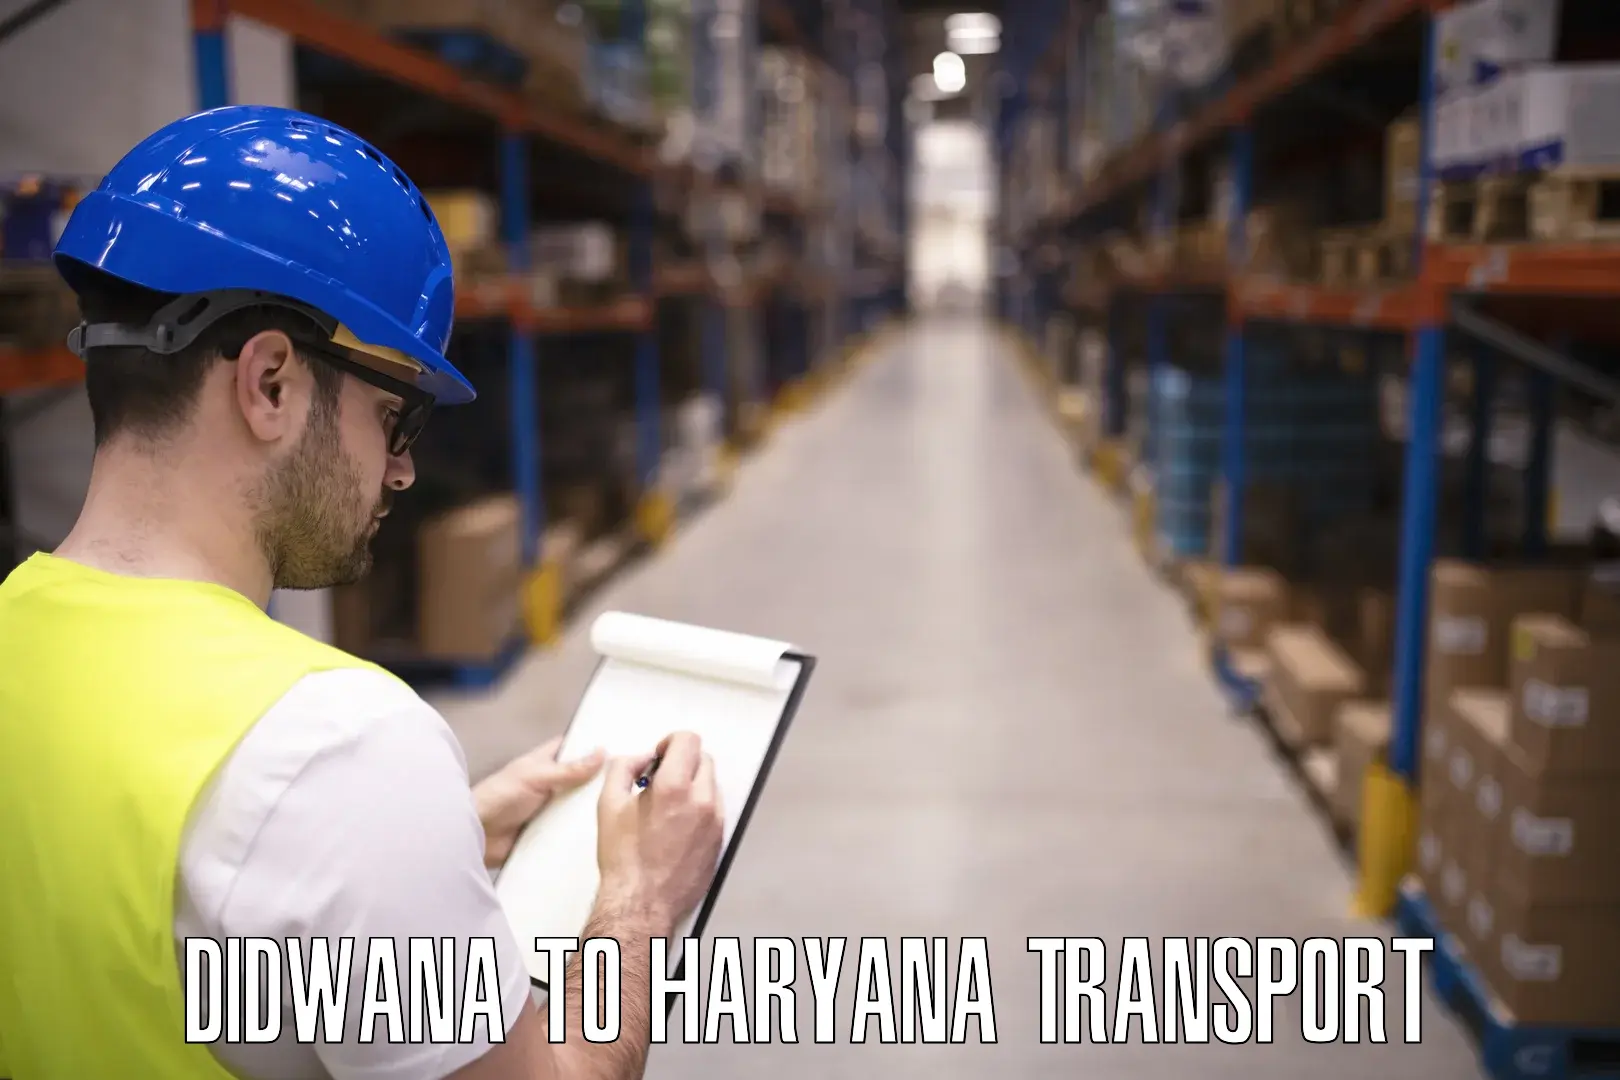 Material transport services Didwana to NCR Haryana